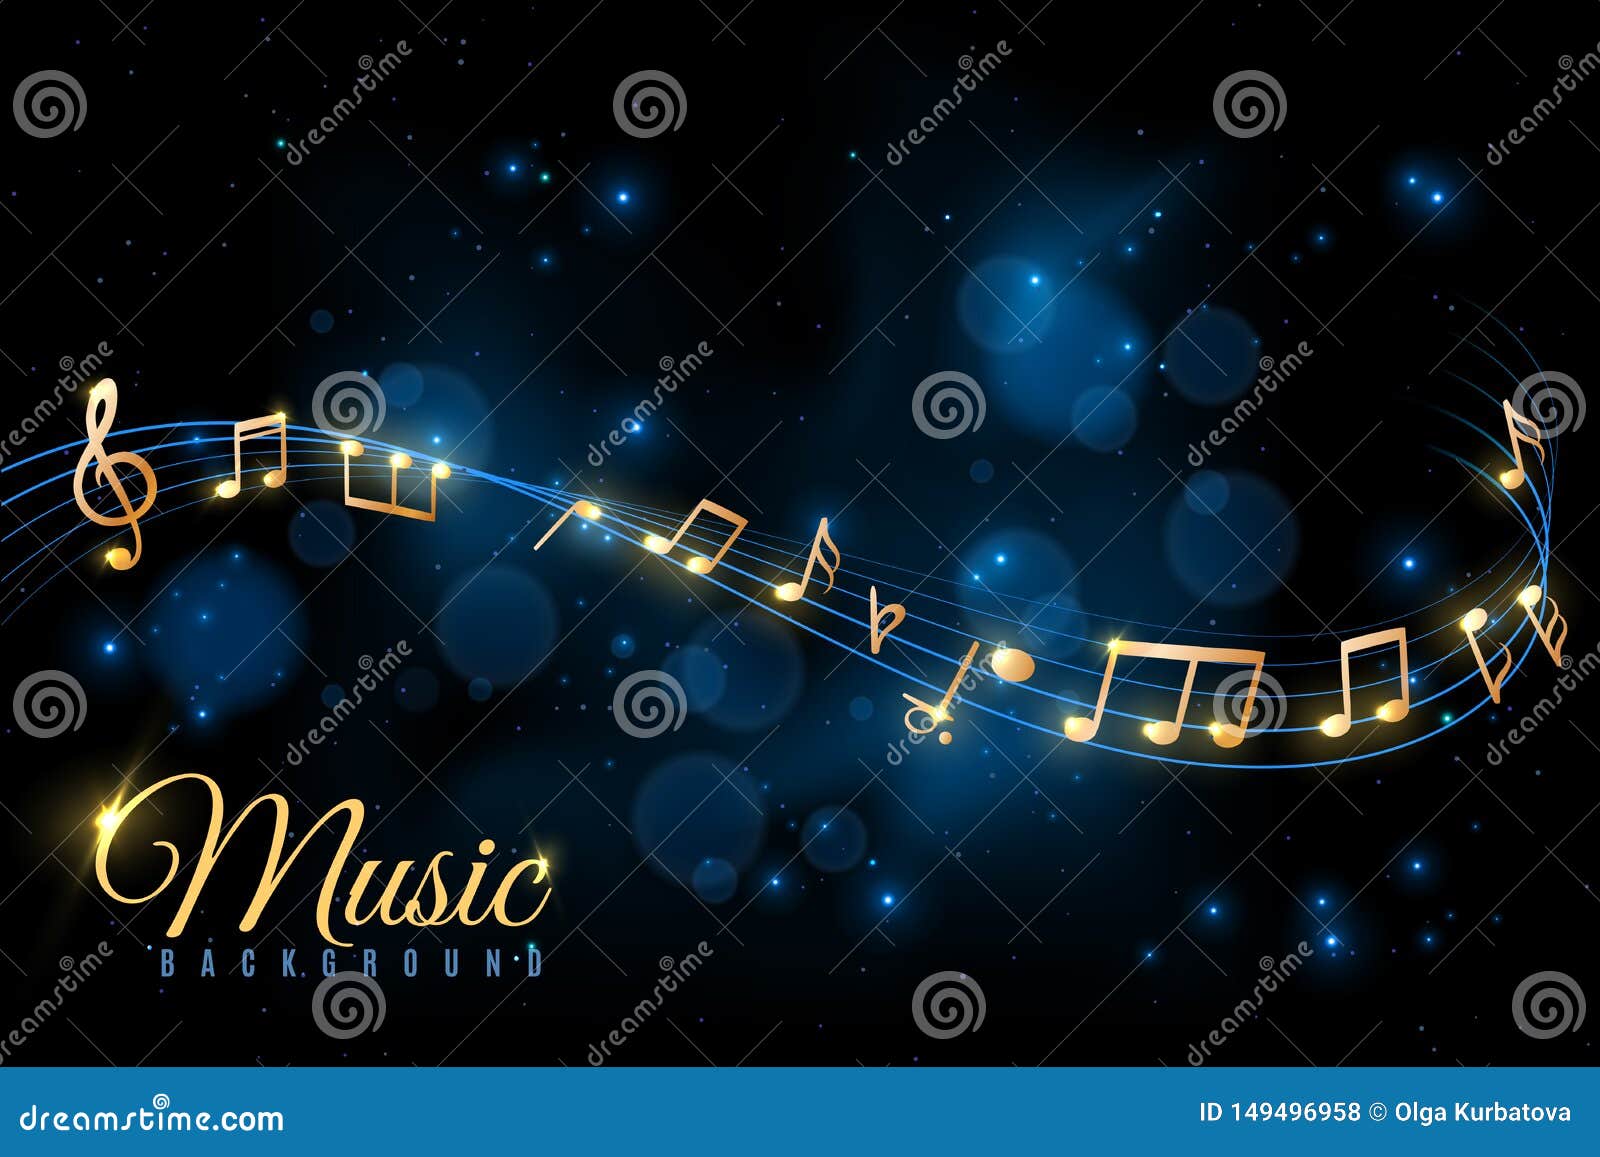 music note poster. musical background, musical notes swirling. jazz album, classical symphony concert announcement